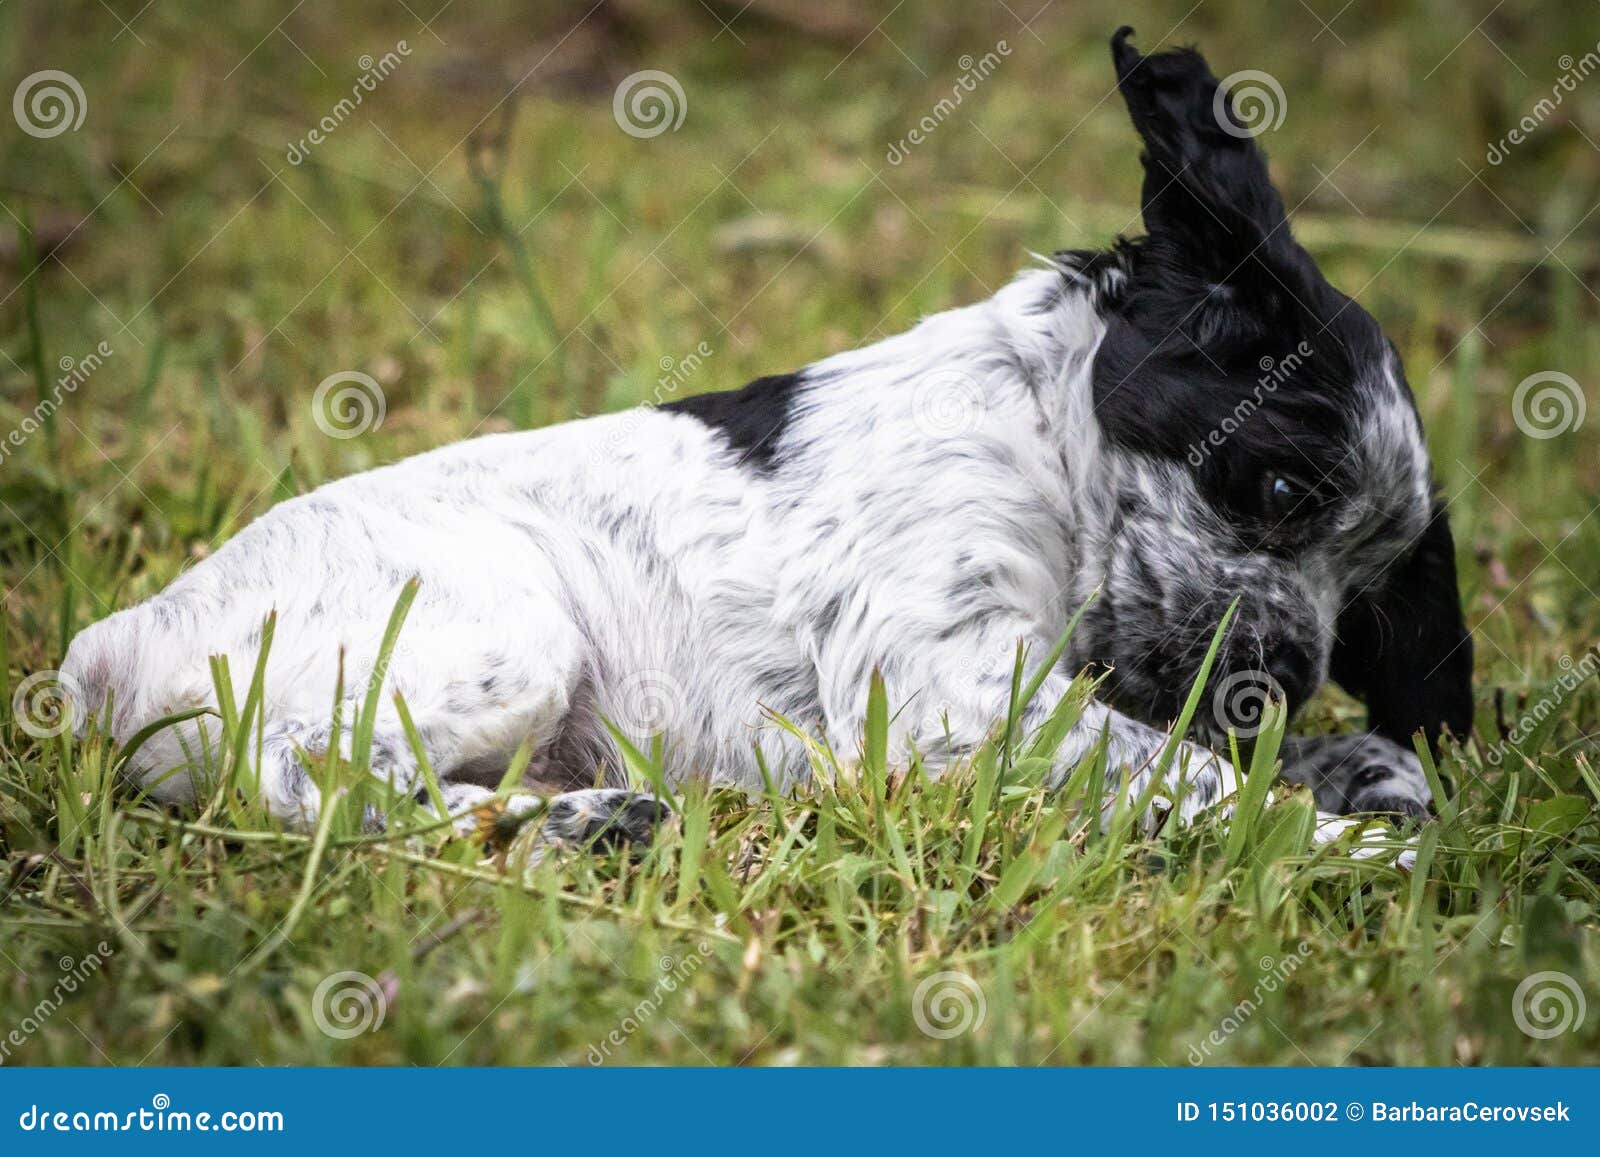 Cute And Curious Black And White Baby Brittany Spaniel Dog Puppy Portrait Playing And Exploring Having Fun Stock Photo Image Of Beautiful Doggies 151036002